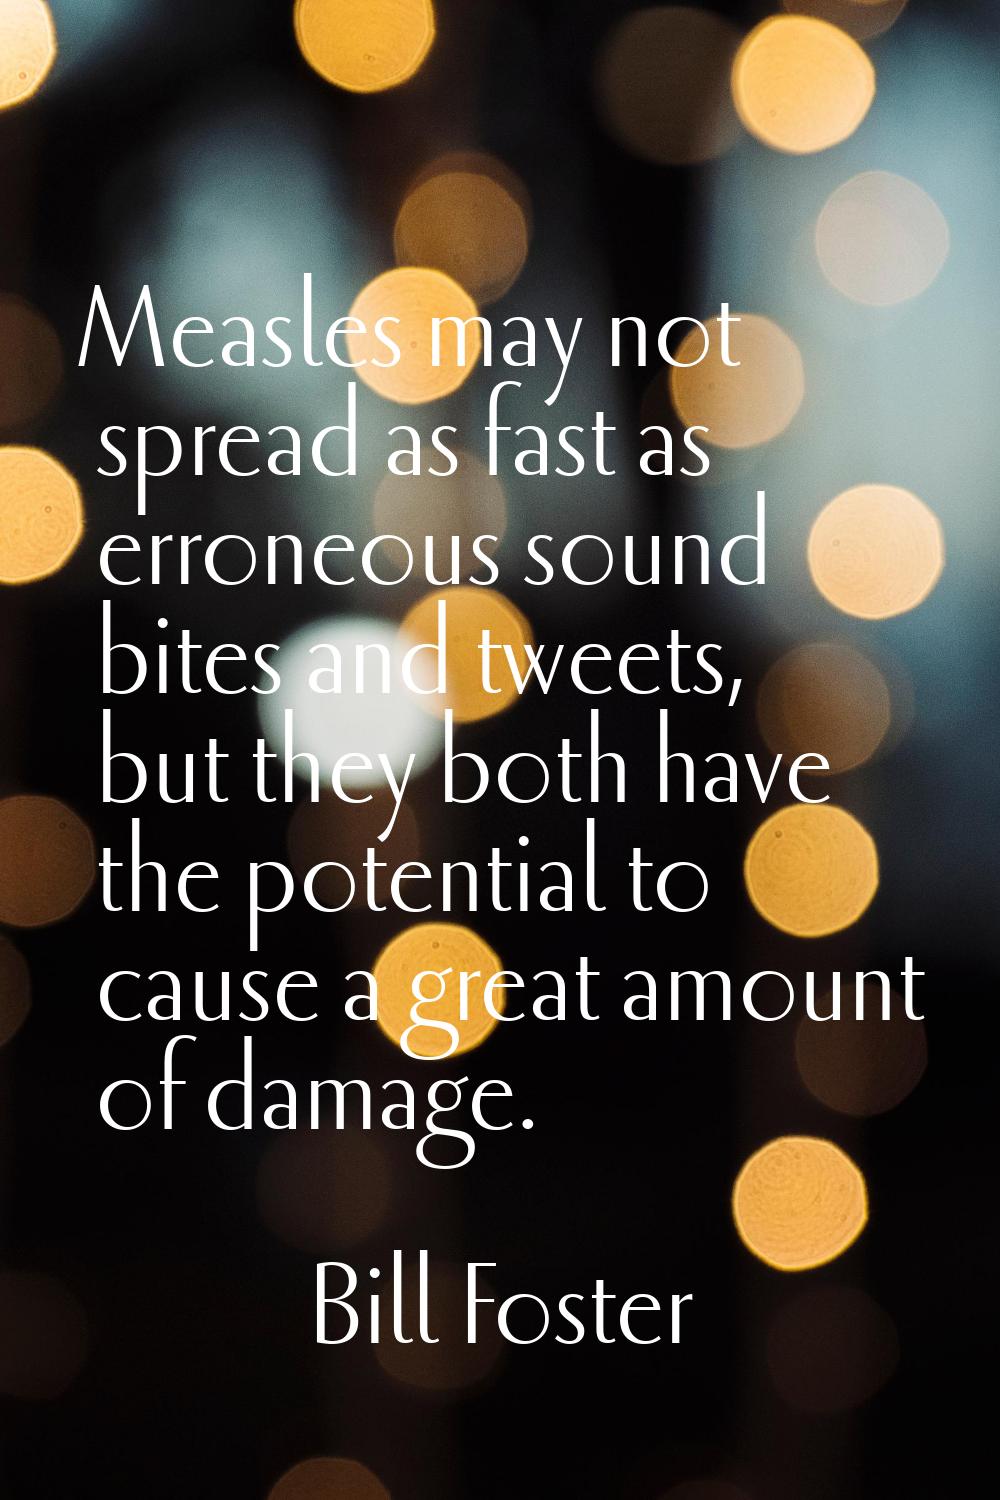 Measles may not spread as fast as erroneous sound bites and tweets, but they both have the potentia